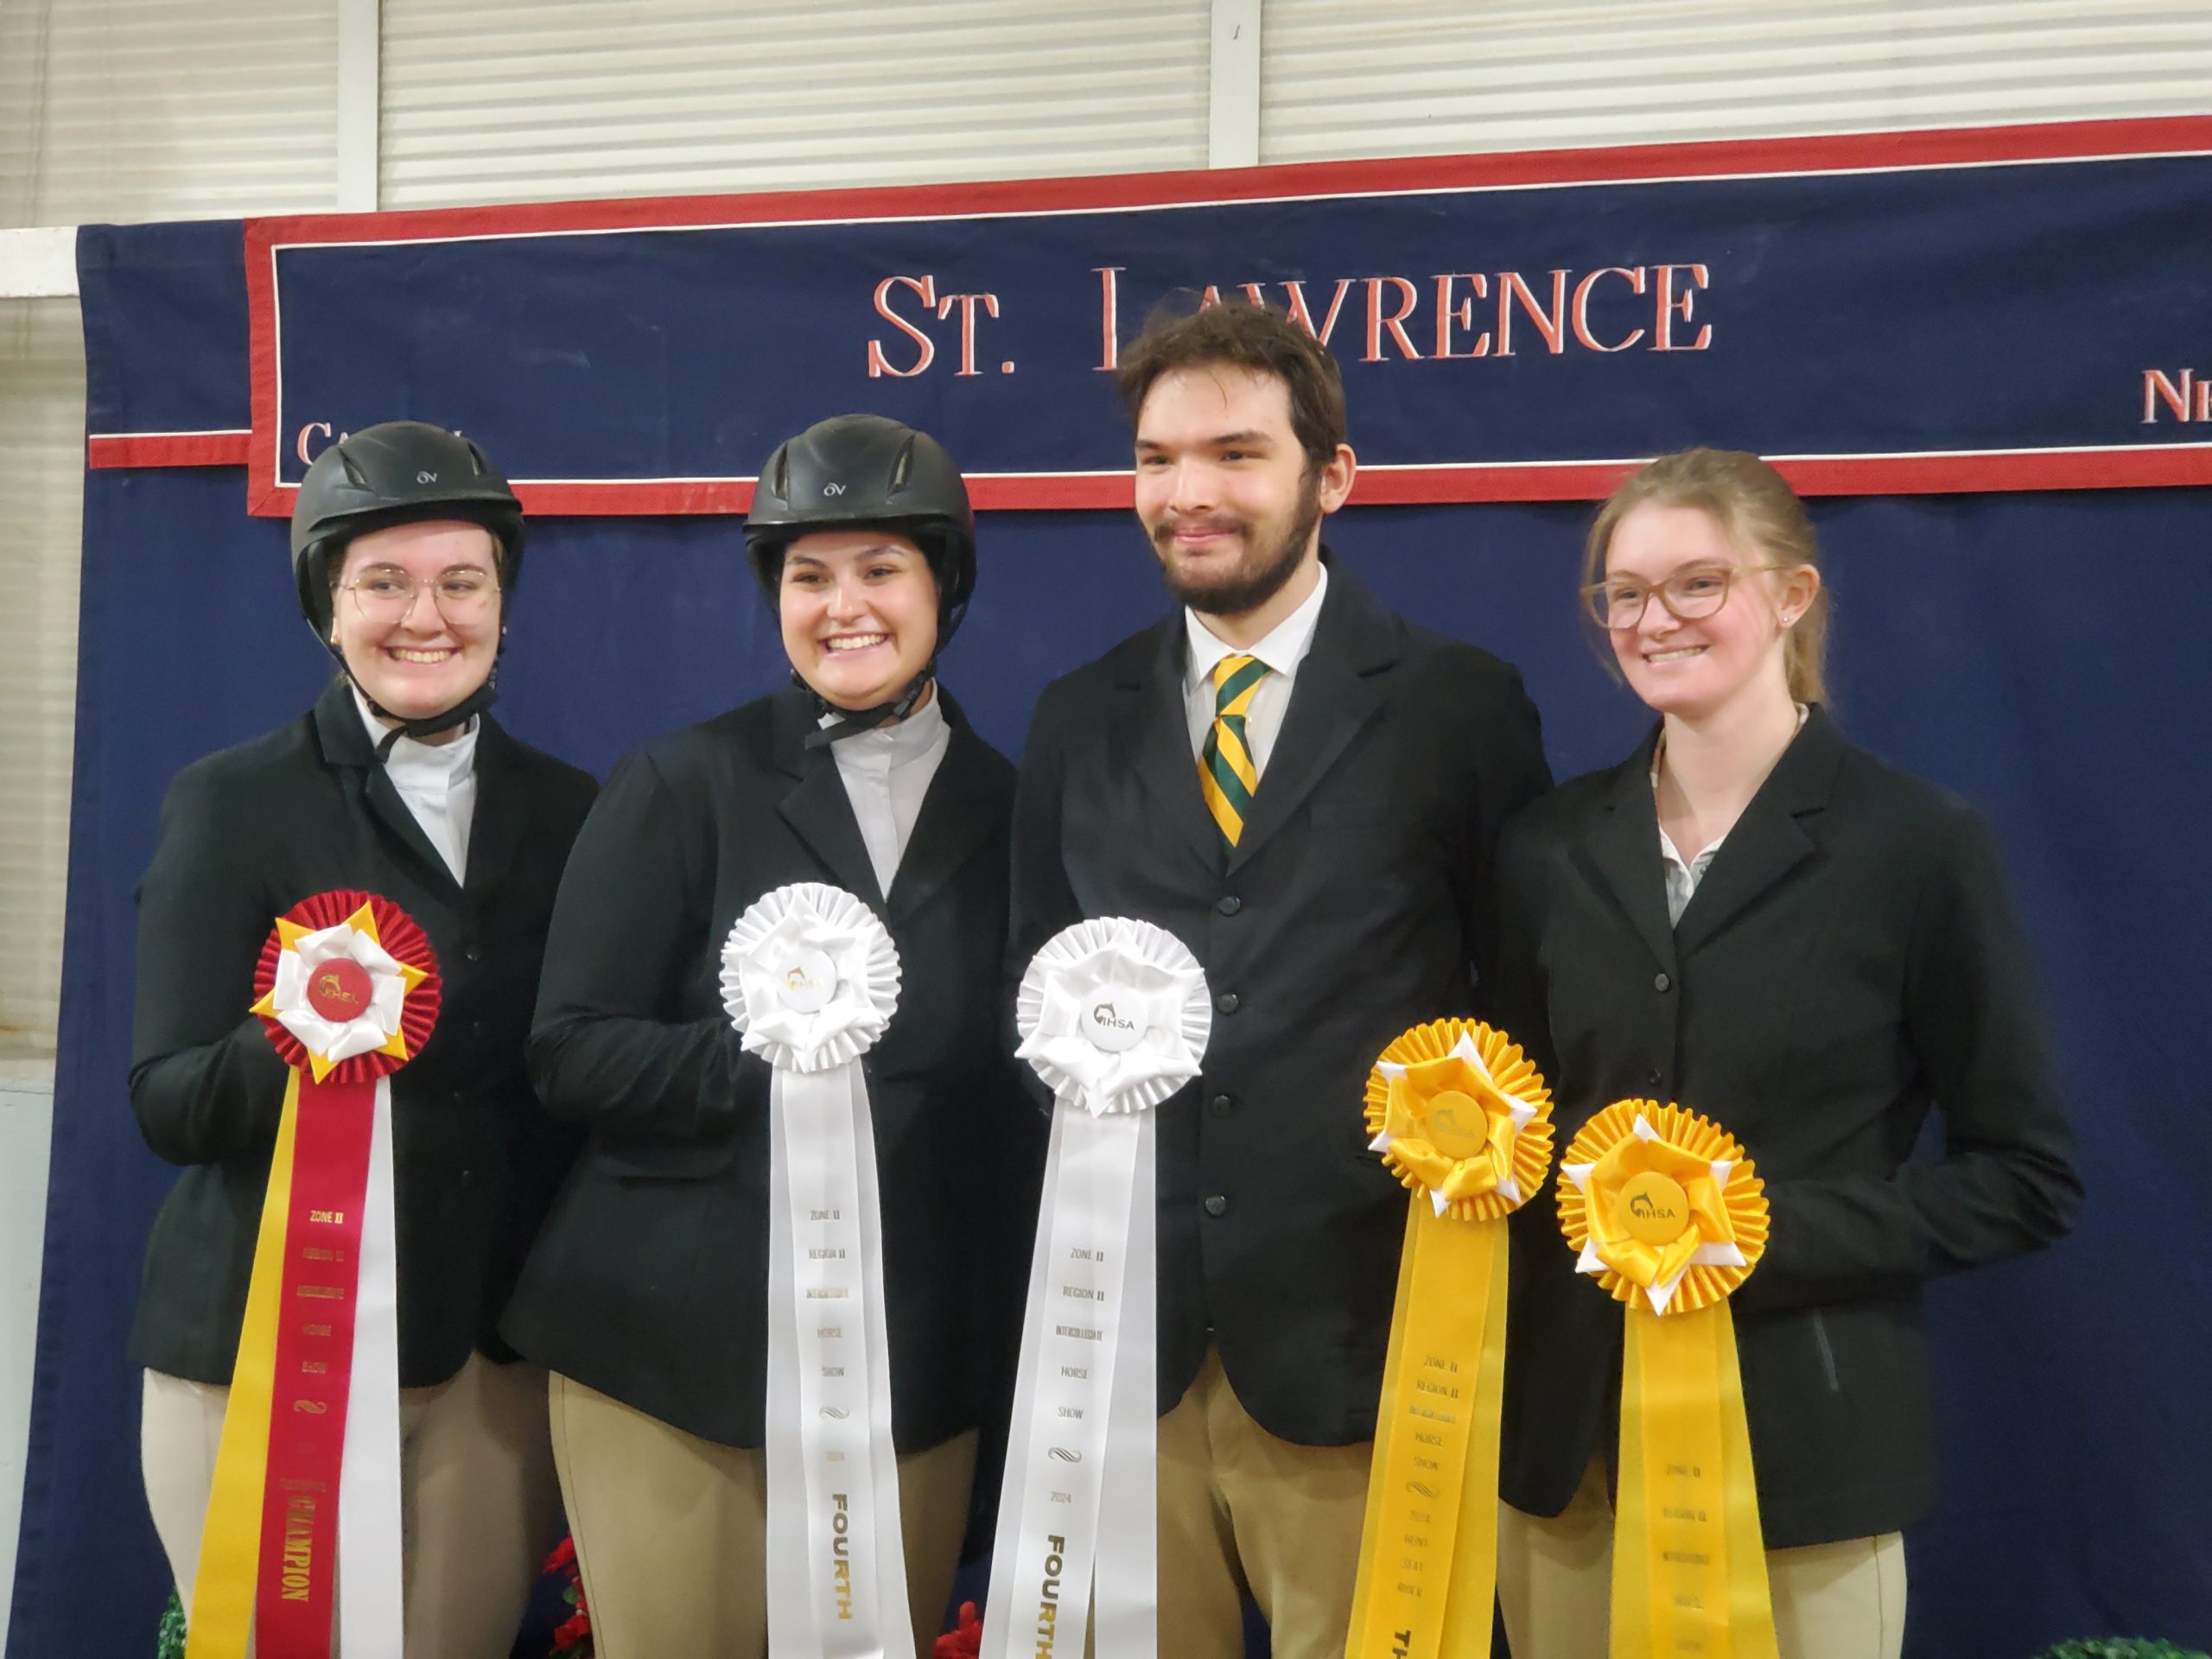 4 people smiling wearing equestrian riding uniforms. Pictured from left to right, a woman holding a second place ribbon, a woman holding a fourth place ribbon, a man holding a fourth place ribbon and a woman holding two third place ribbons.